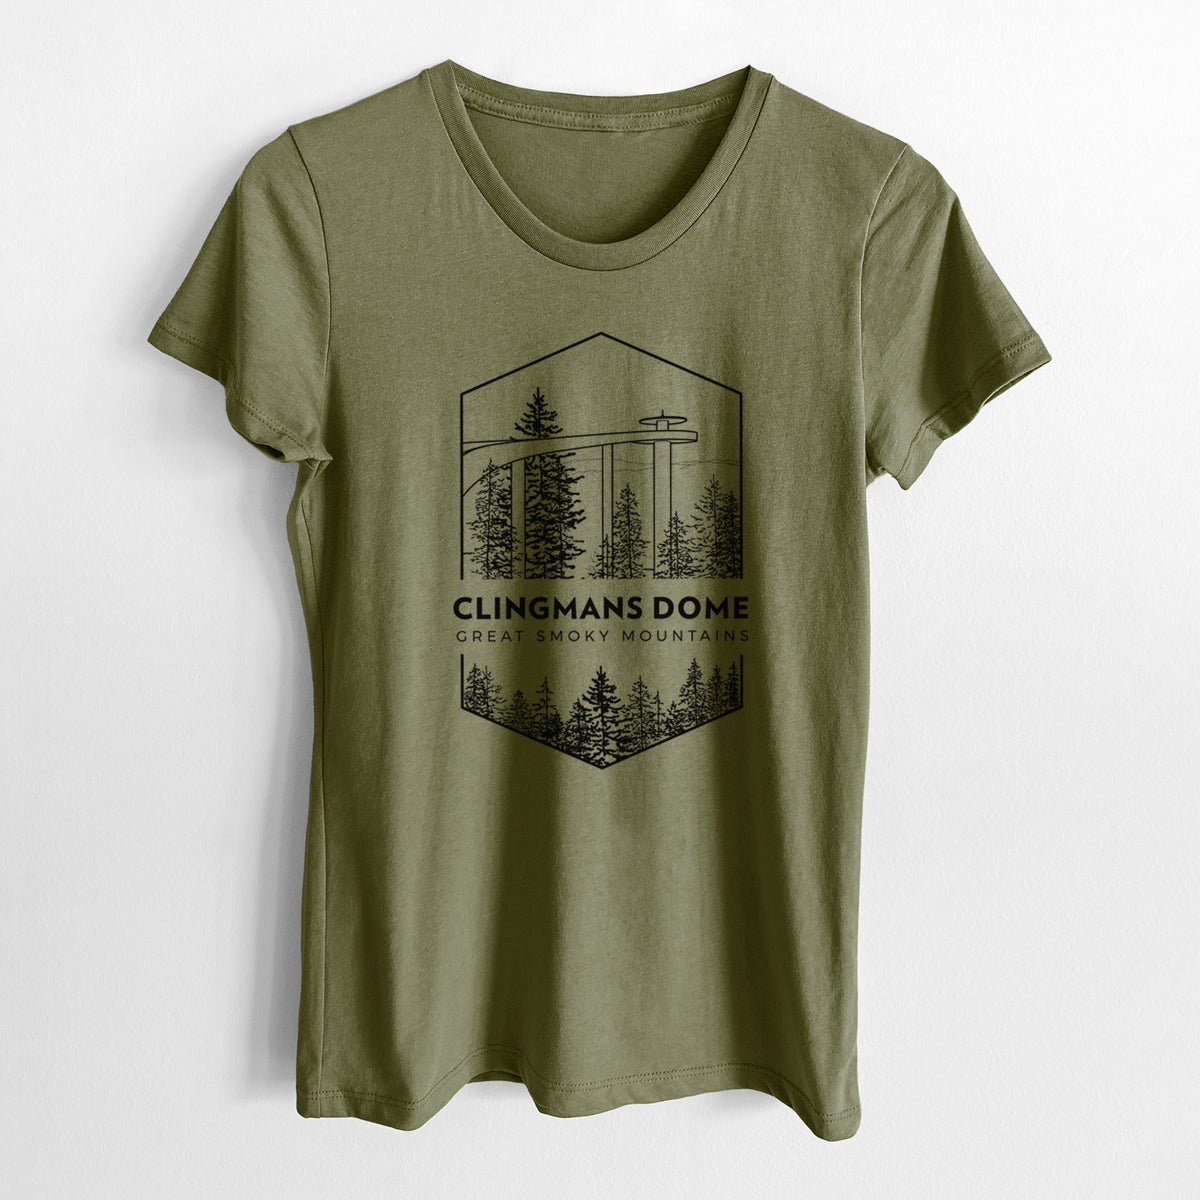 Clingmans Dome - Great Smoky Mountains National Park - Women&#39;s Crewneck - Made in USA - 100% Organic Cotton